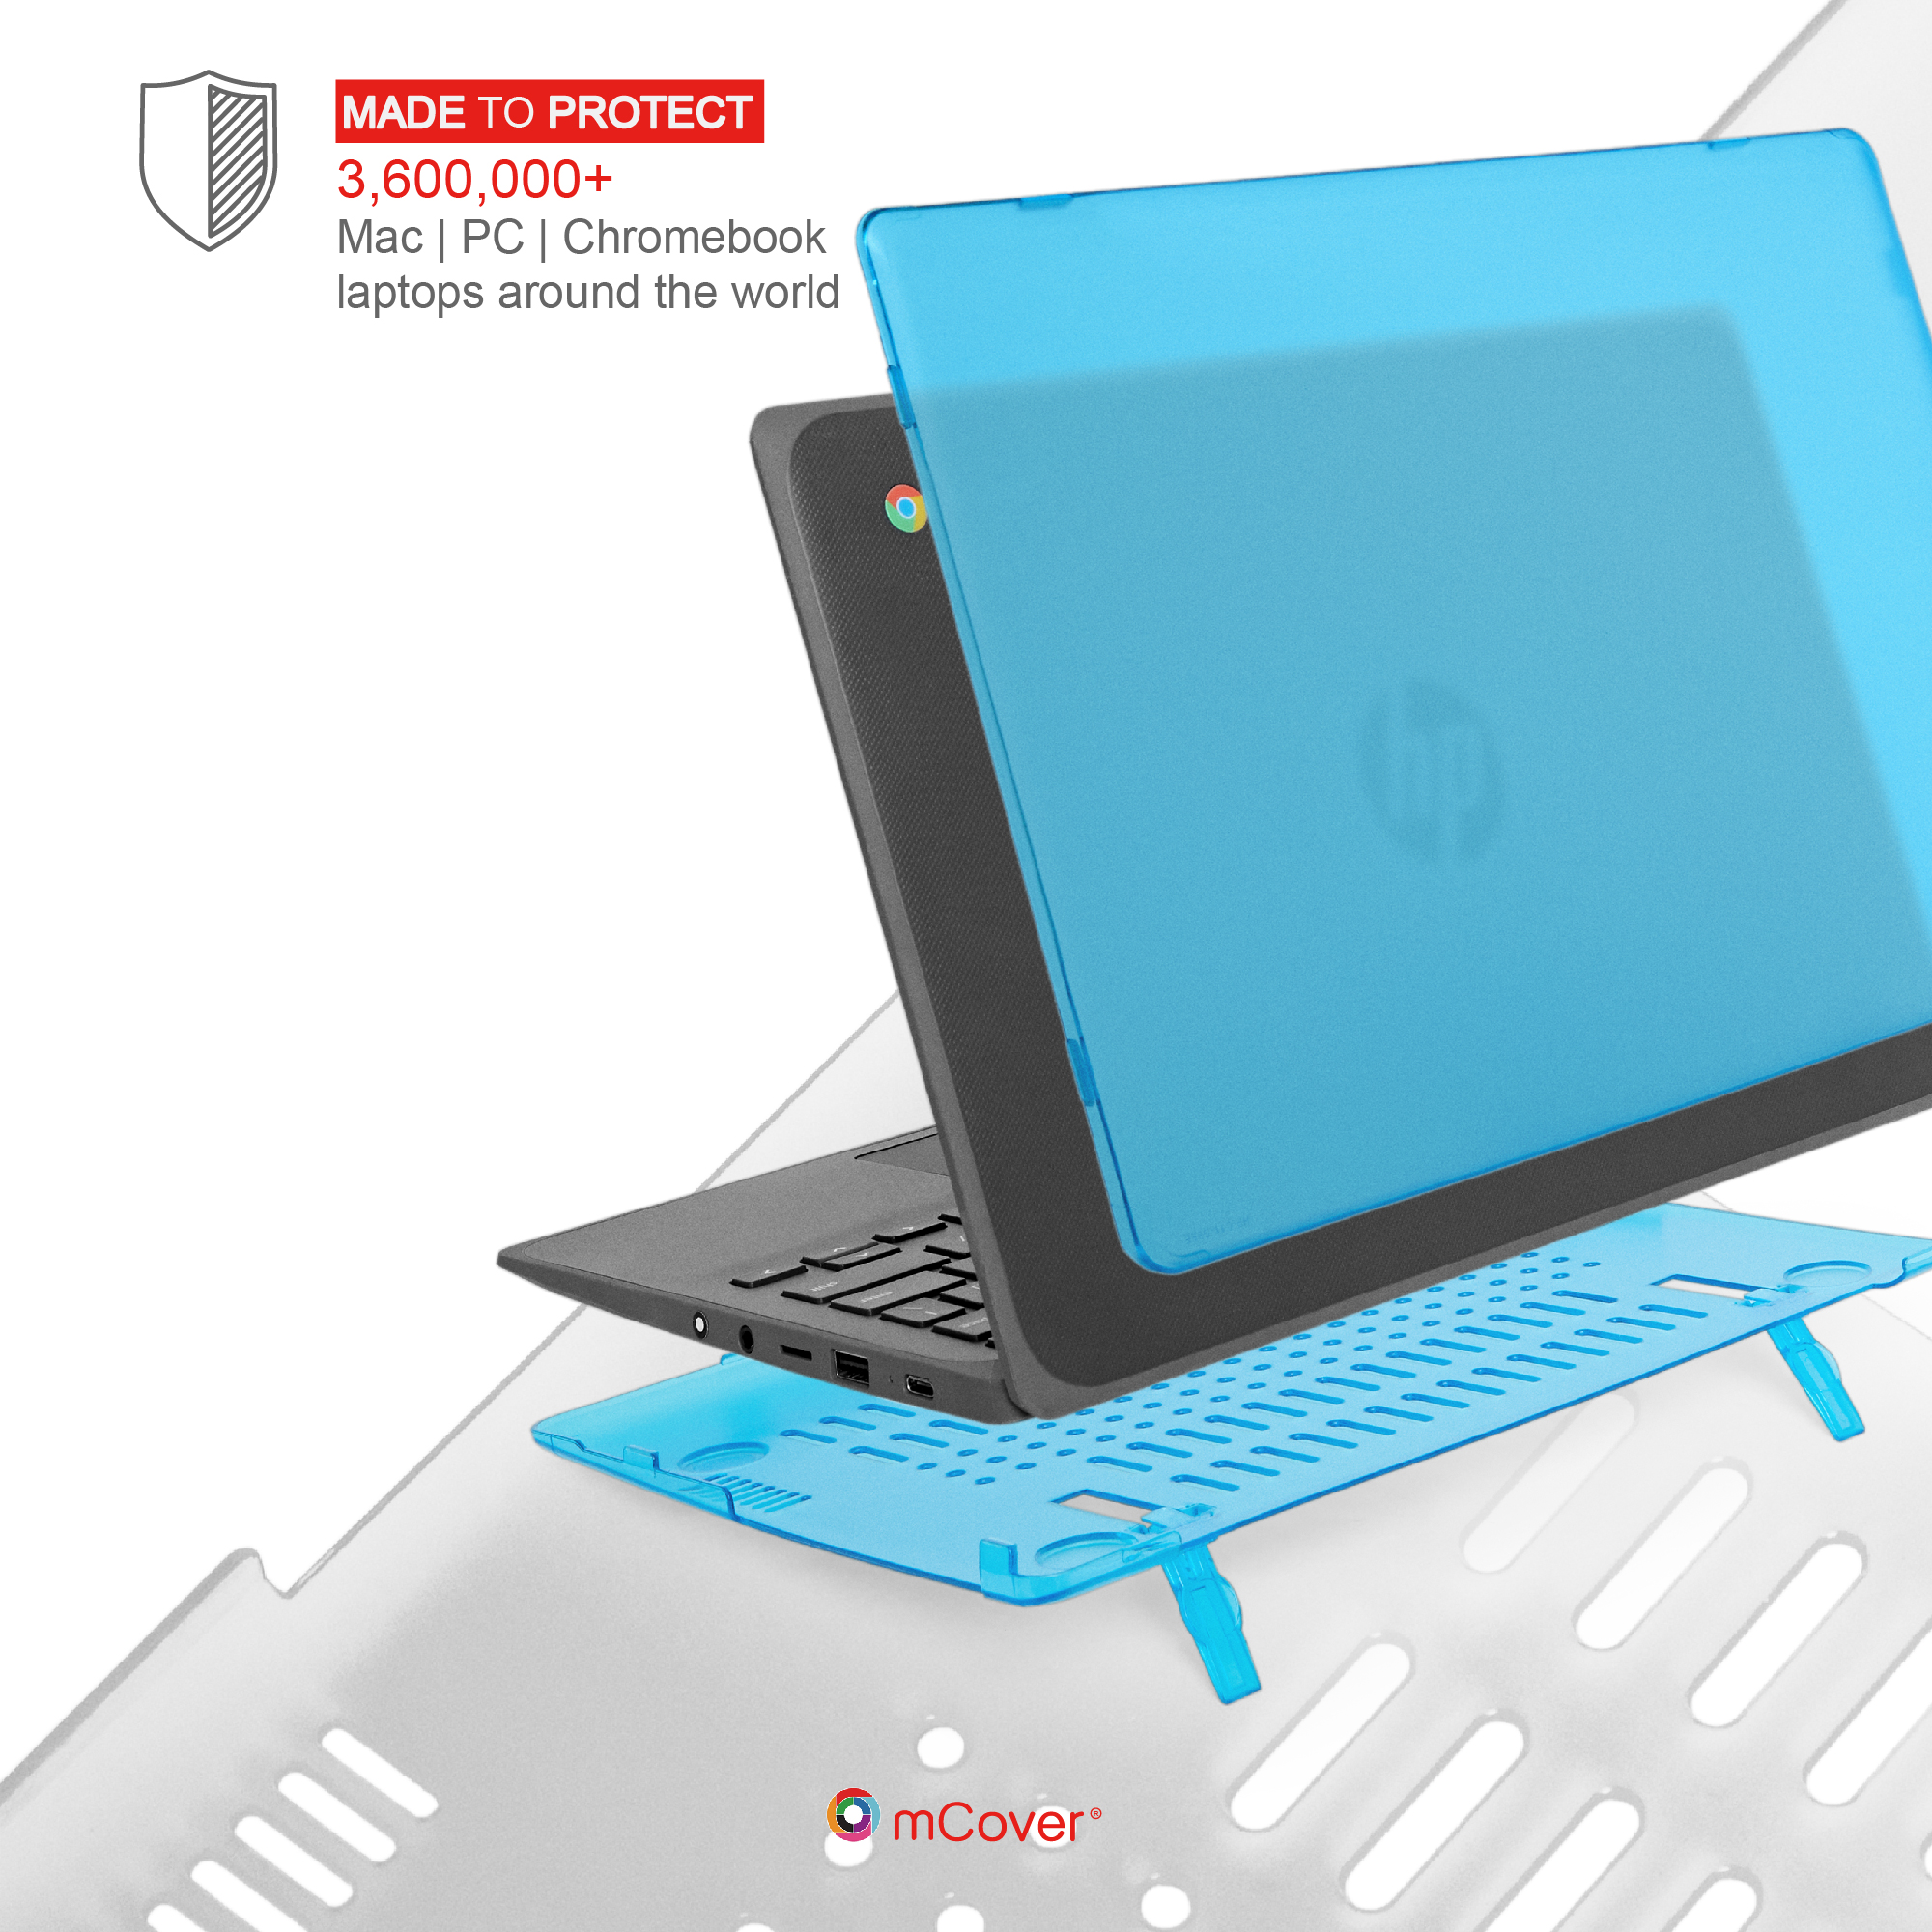 mCover Hard Shell case for HP Chromebook 11 G8EE 11.6"